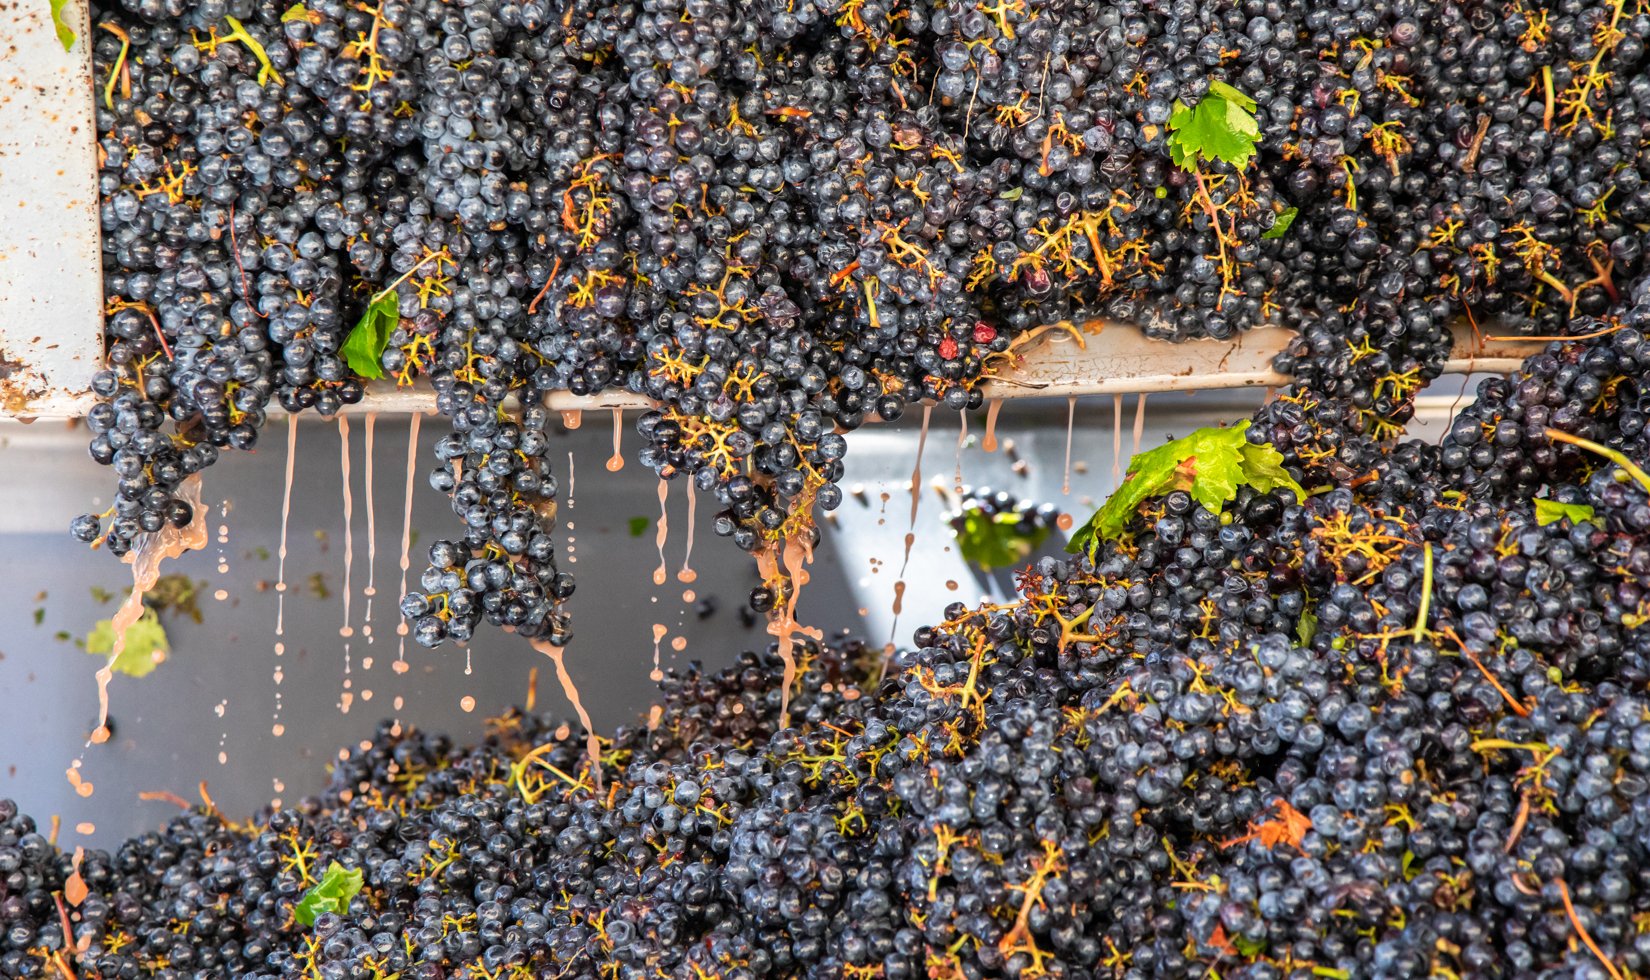 cabernet grapes being crushed in hopper